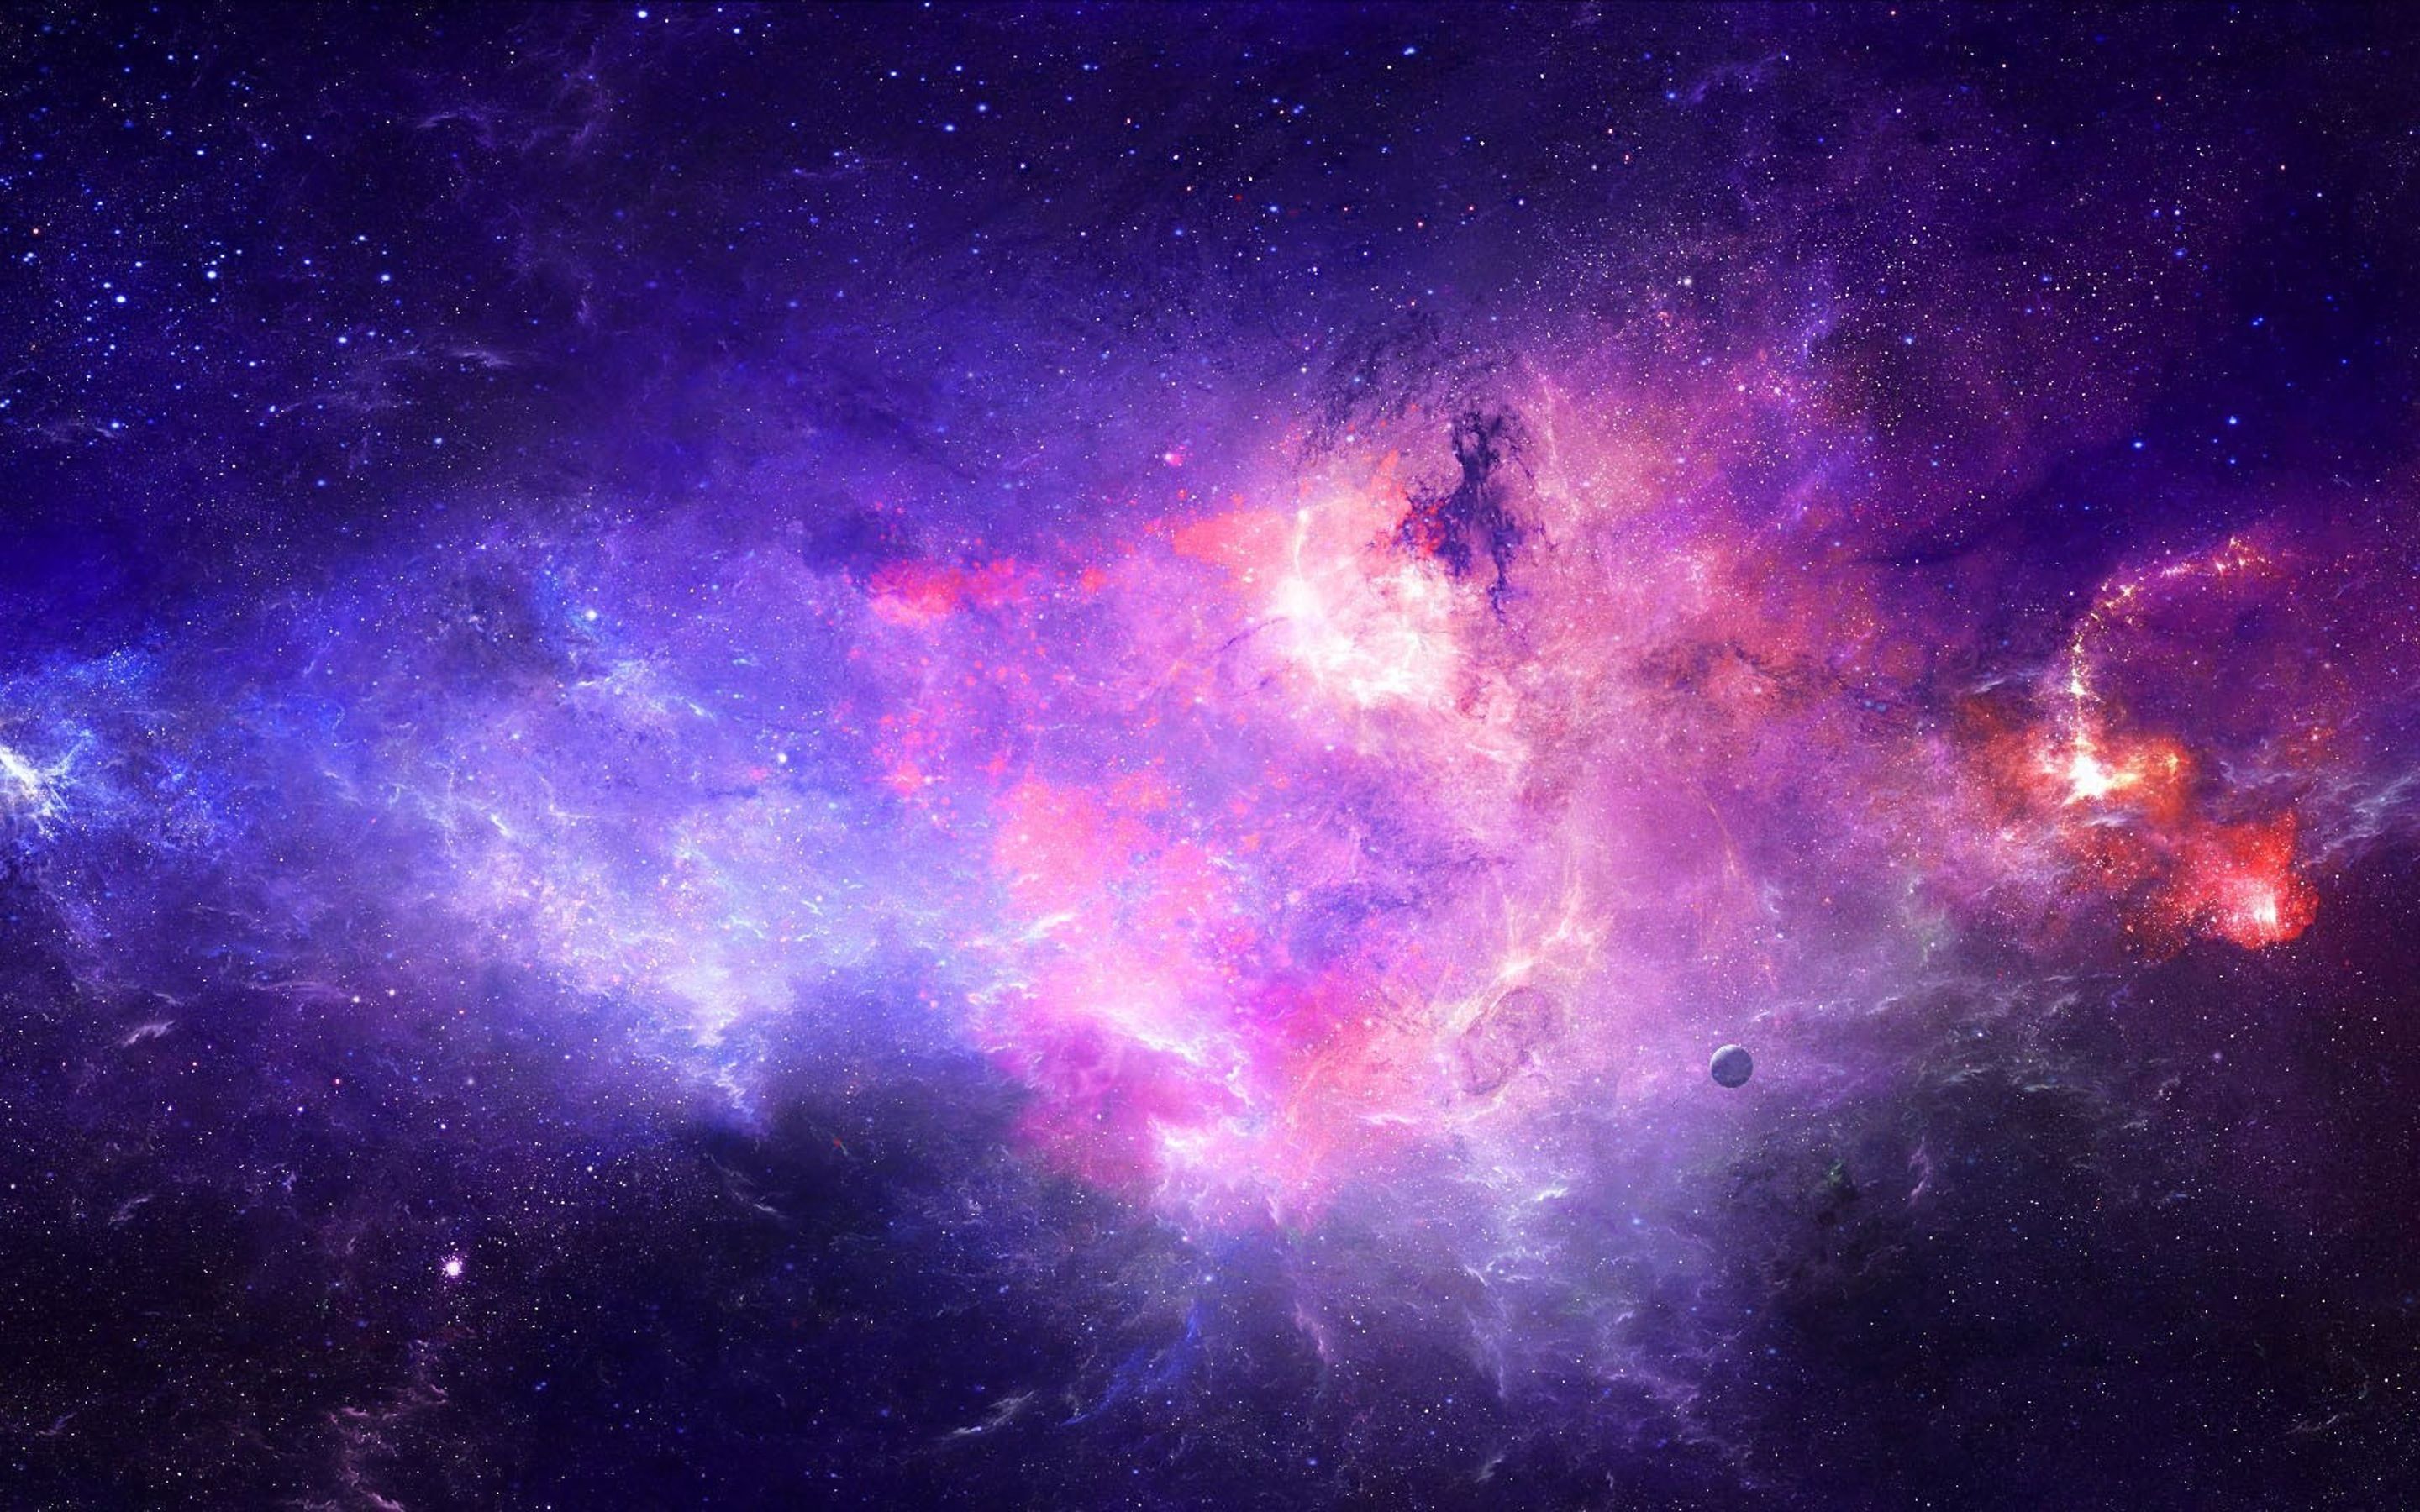 Colorful Galaxy Computer Wallpapers Wallpaper Cave